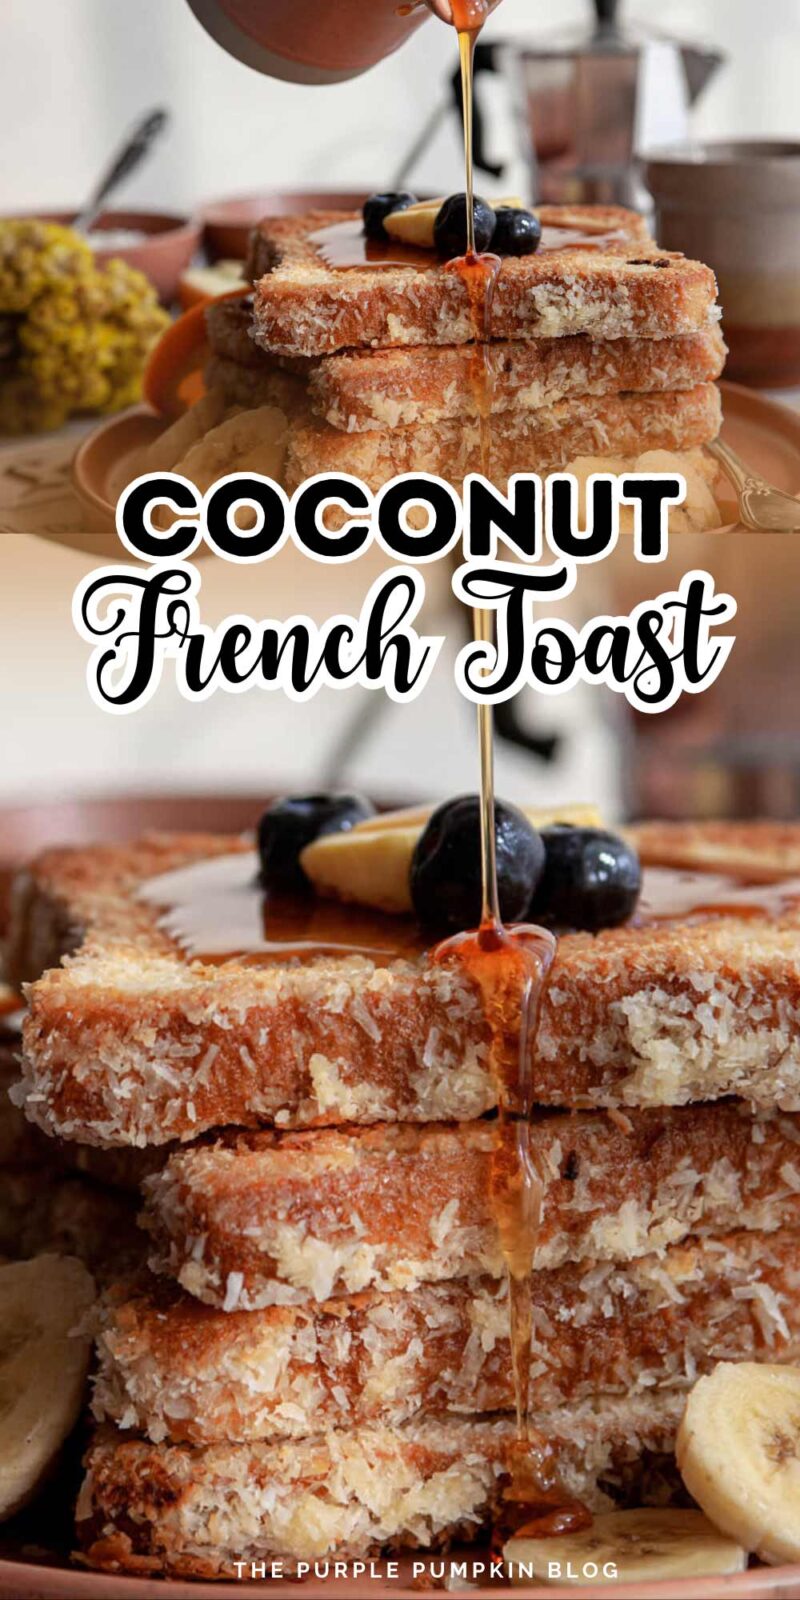 Coconut French Toast for Brunch